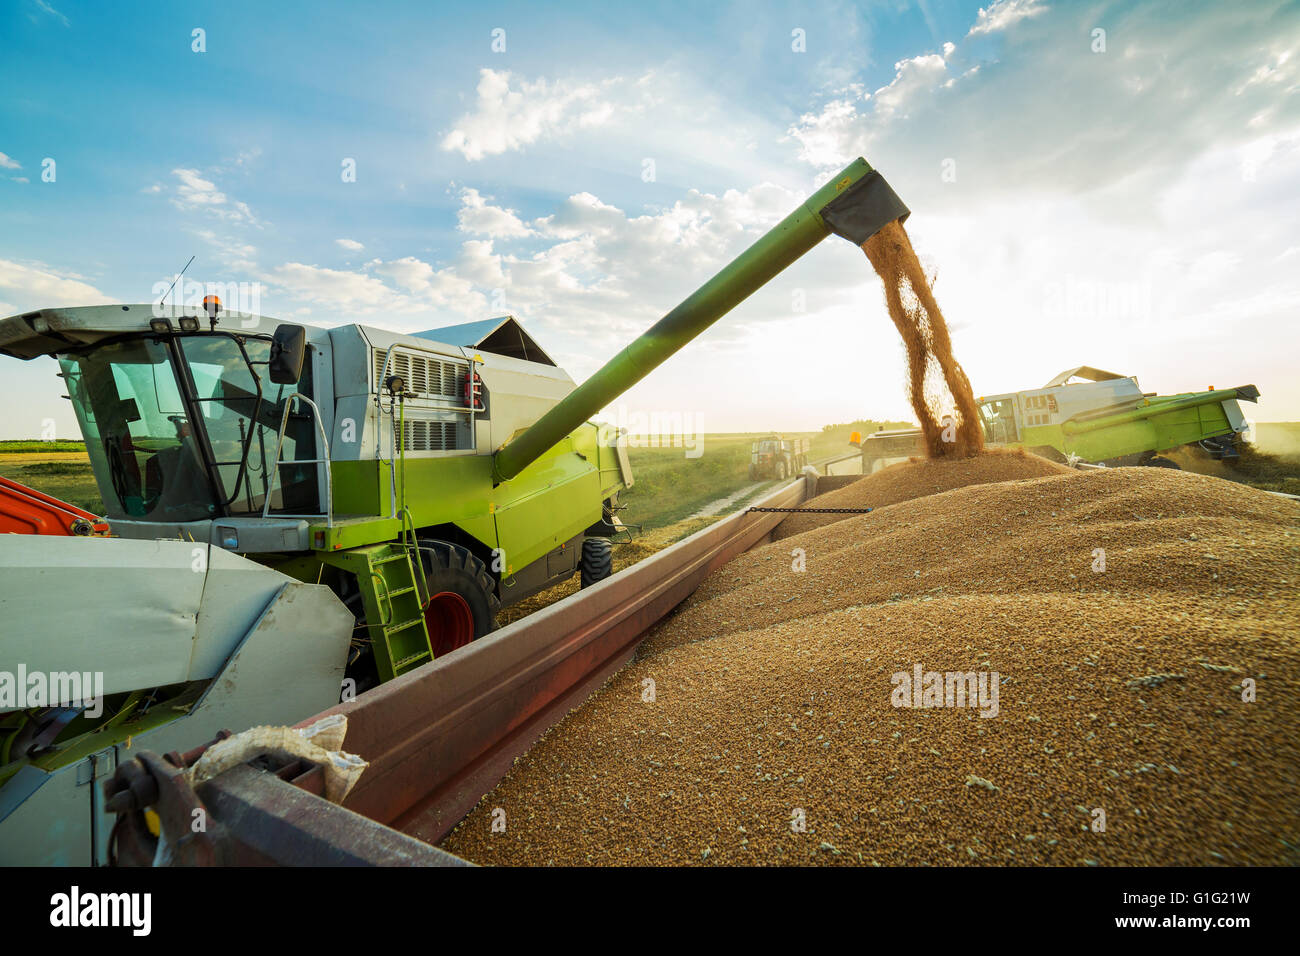 Combine harvester in action on wheat field, unloading grains Stock Photo